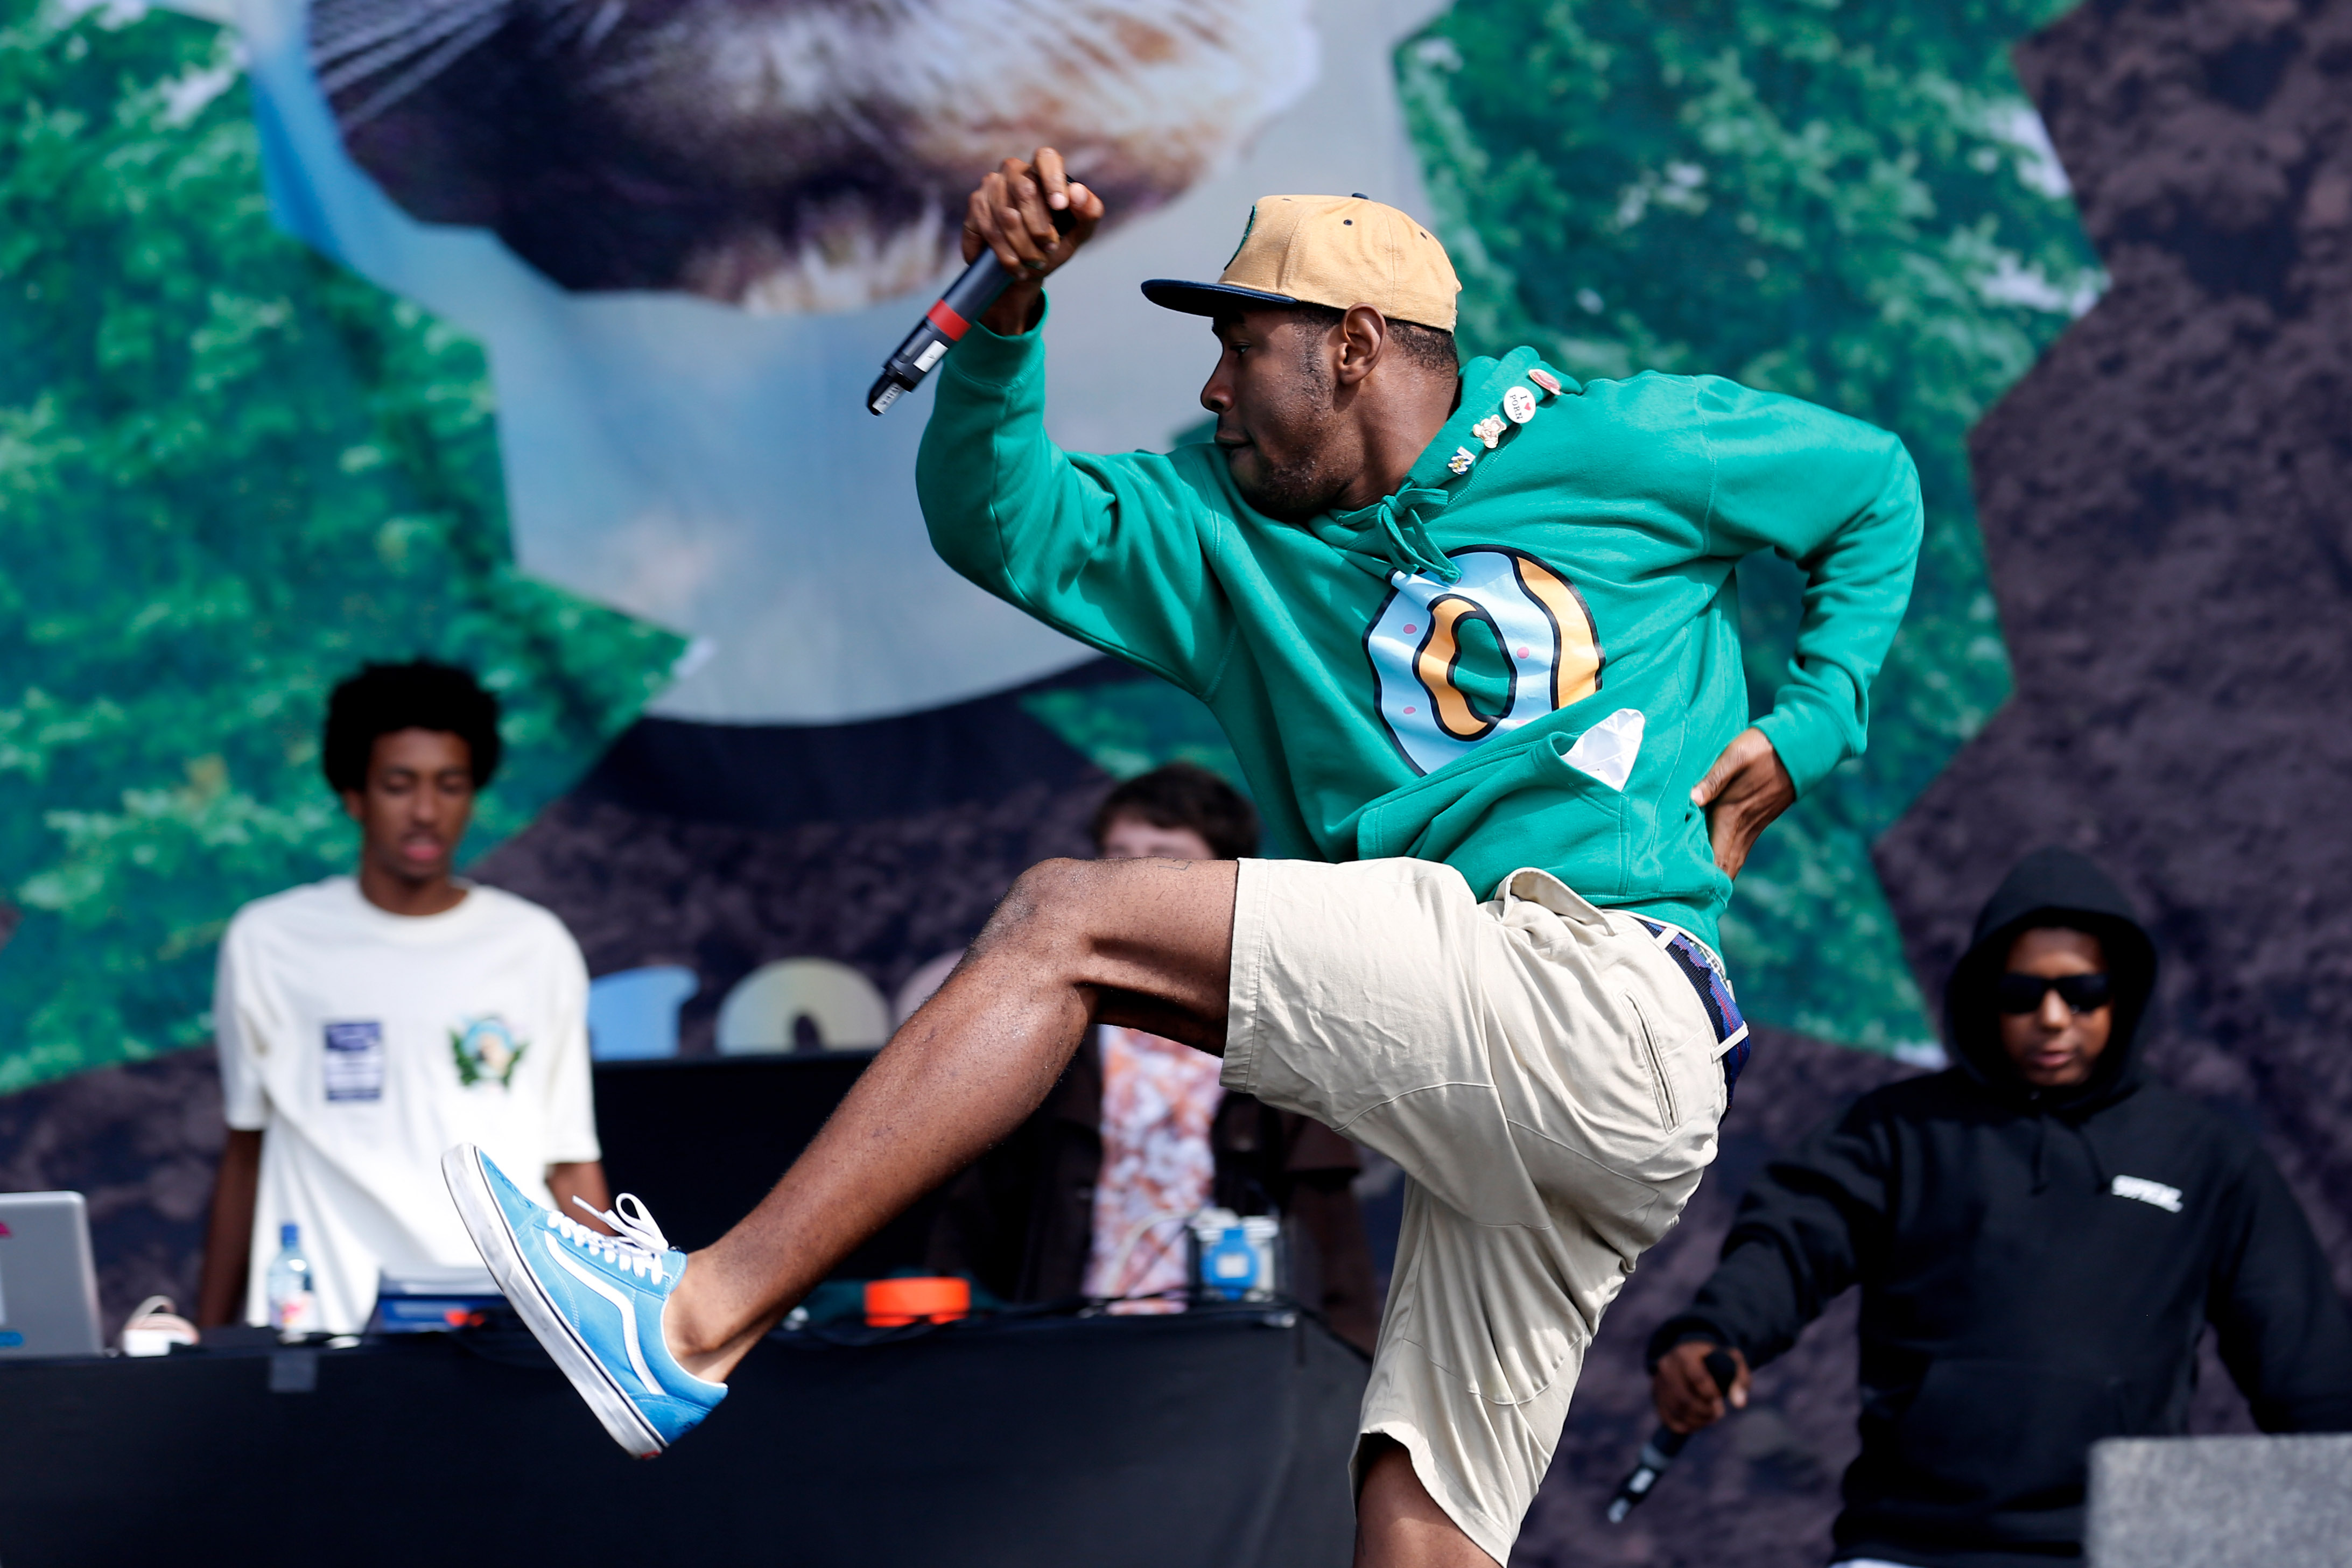 Viceland Announces Tyler, the Creator's Show